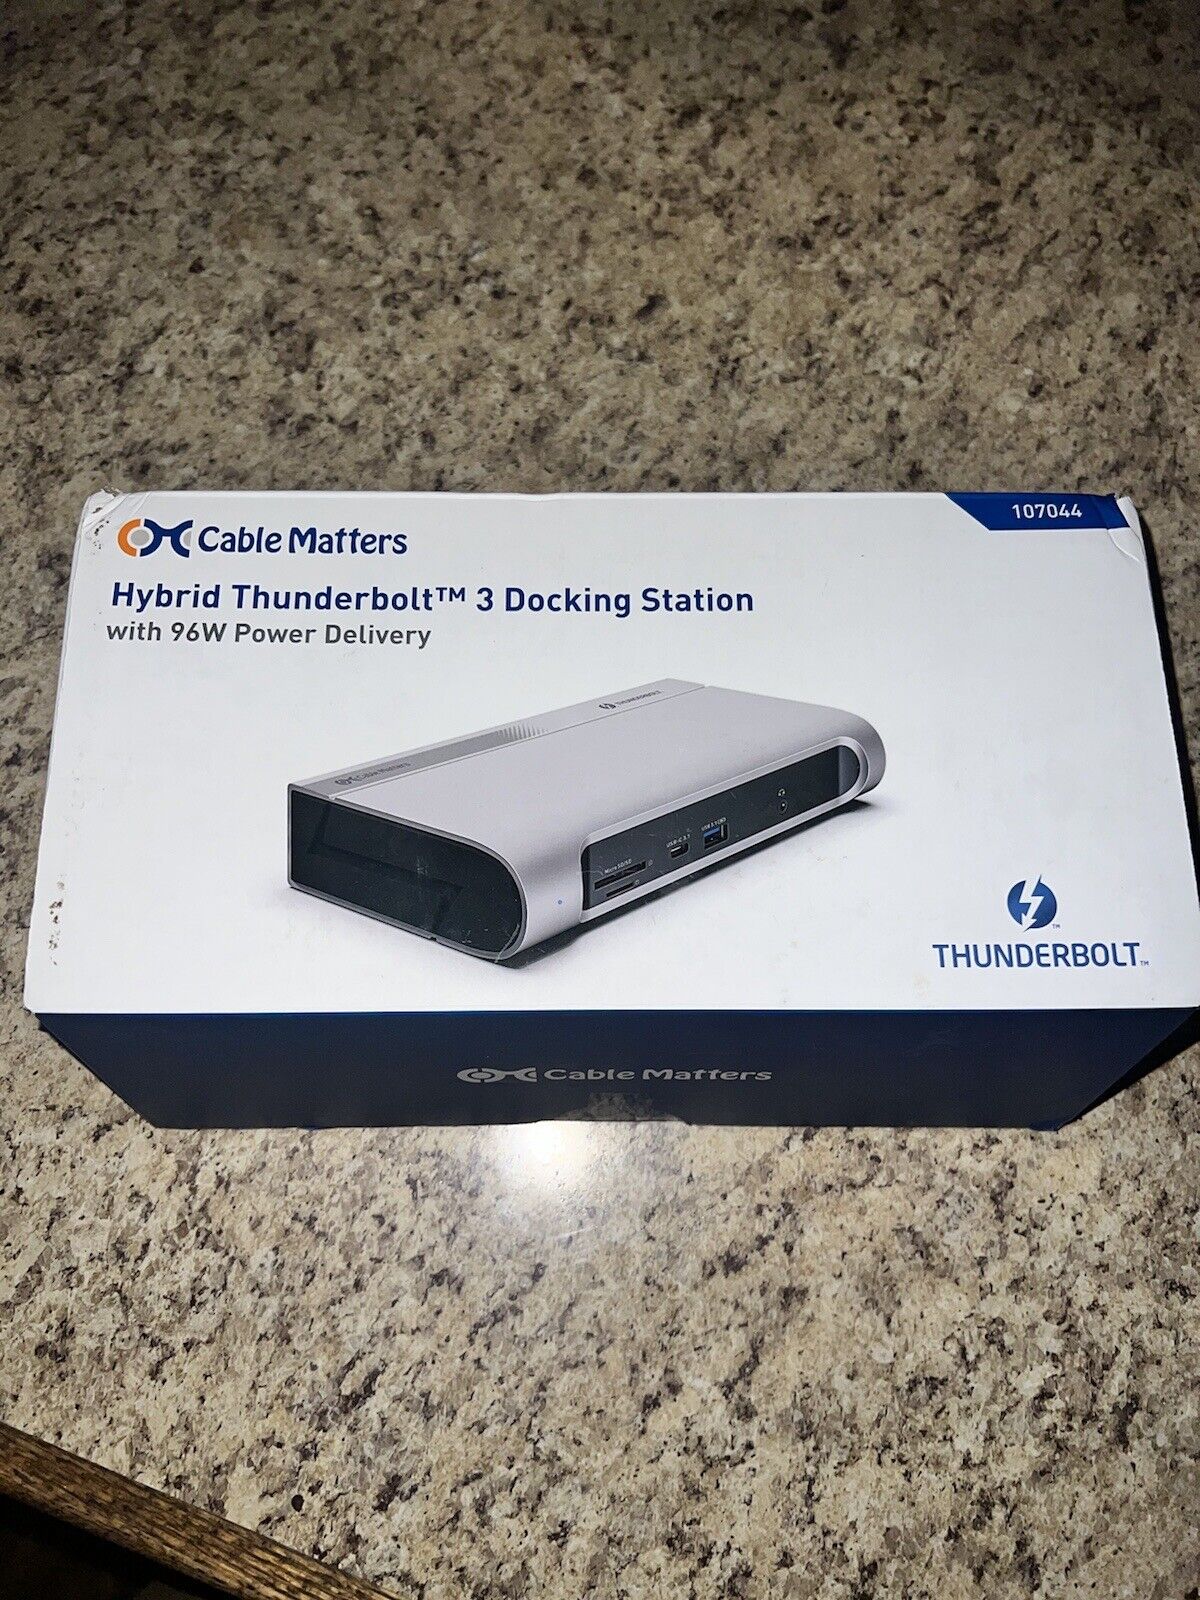 Cable Matters Hybrid Thunderbolt 3 Docking Station 96W Power Delivery 107044